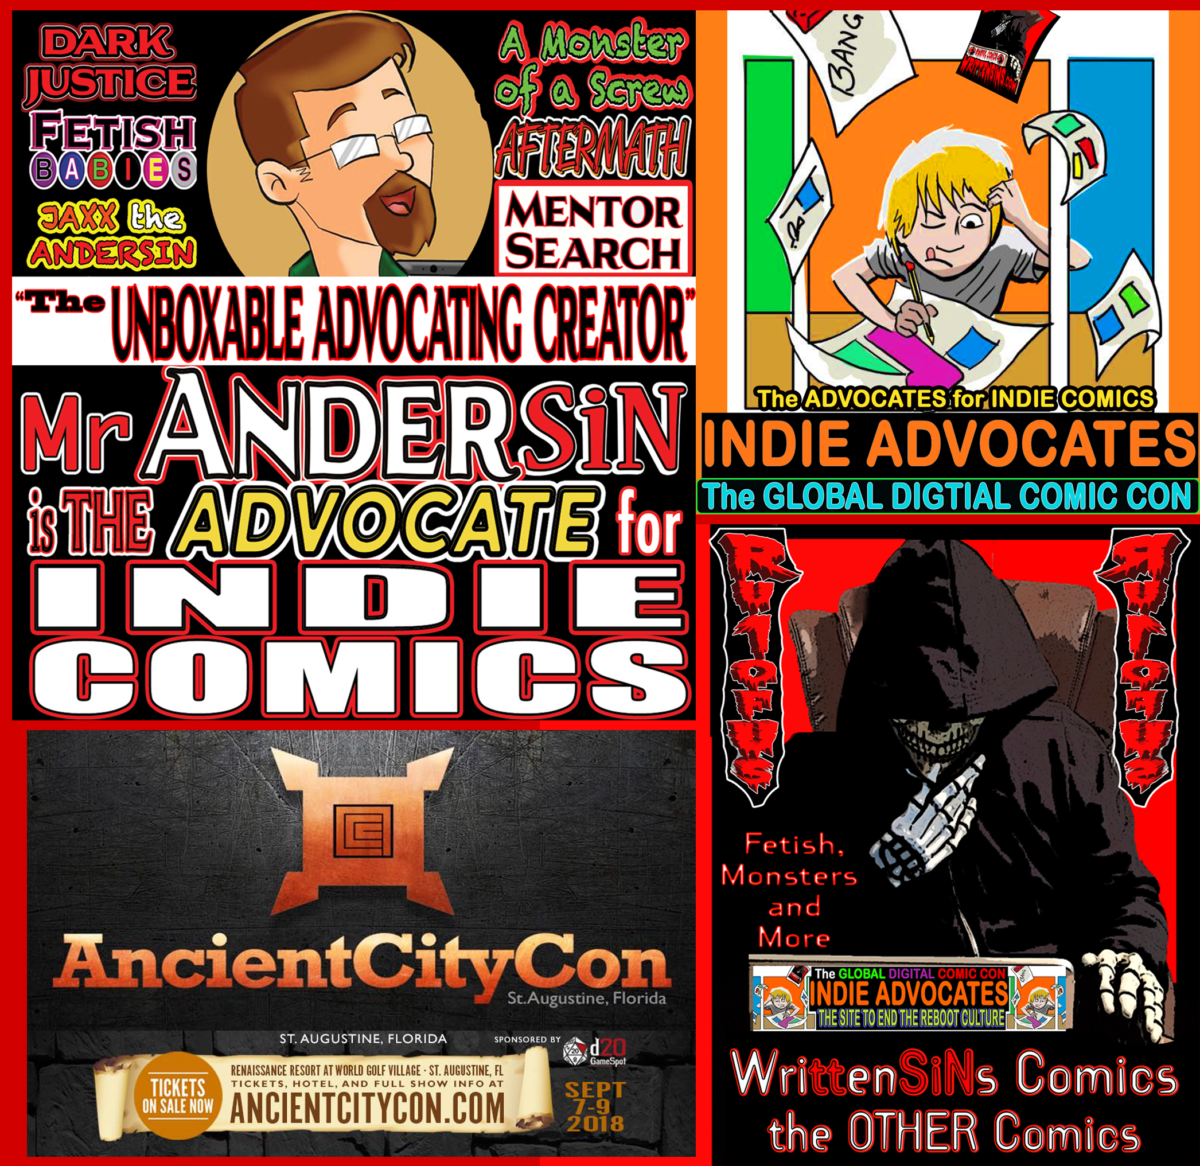 COMIC CON HIGHWAY FLORIDA EXIT:: FEATURING:: ANCIENT CITYCON, Will FEATURE -Mr. AnderSiN, WrittenSiNs Comics and INDIE ADVOCATES on Sept 7-9